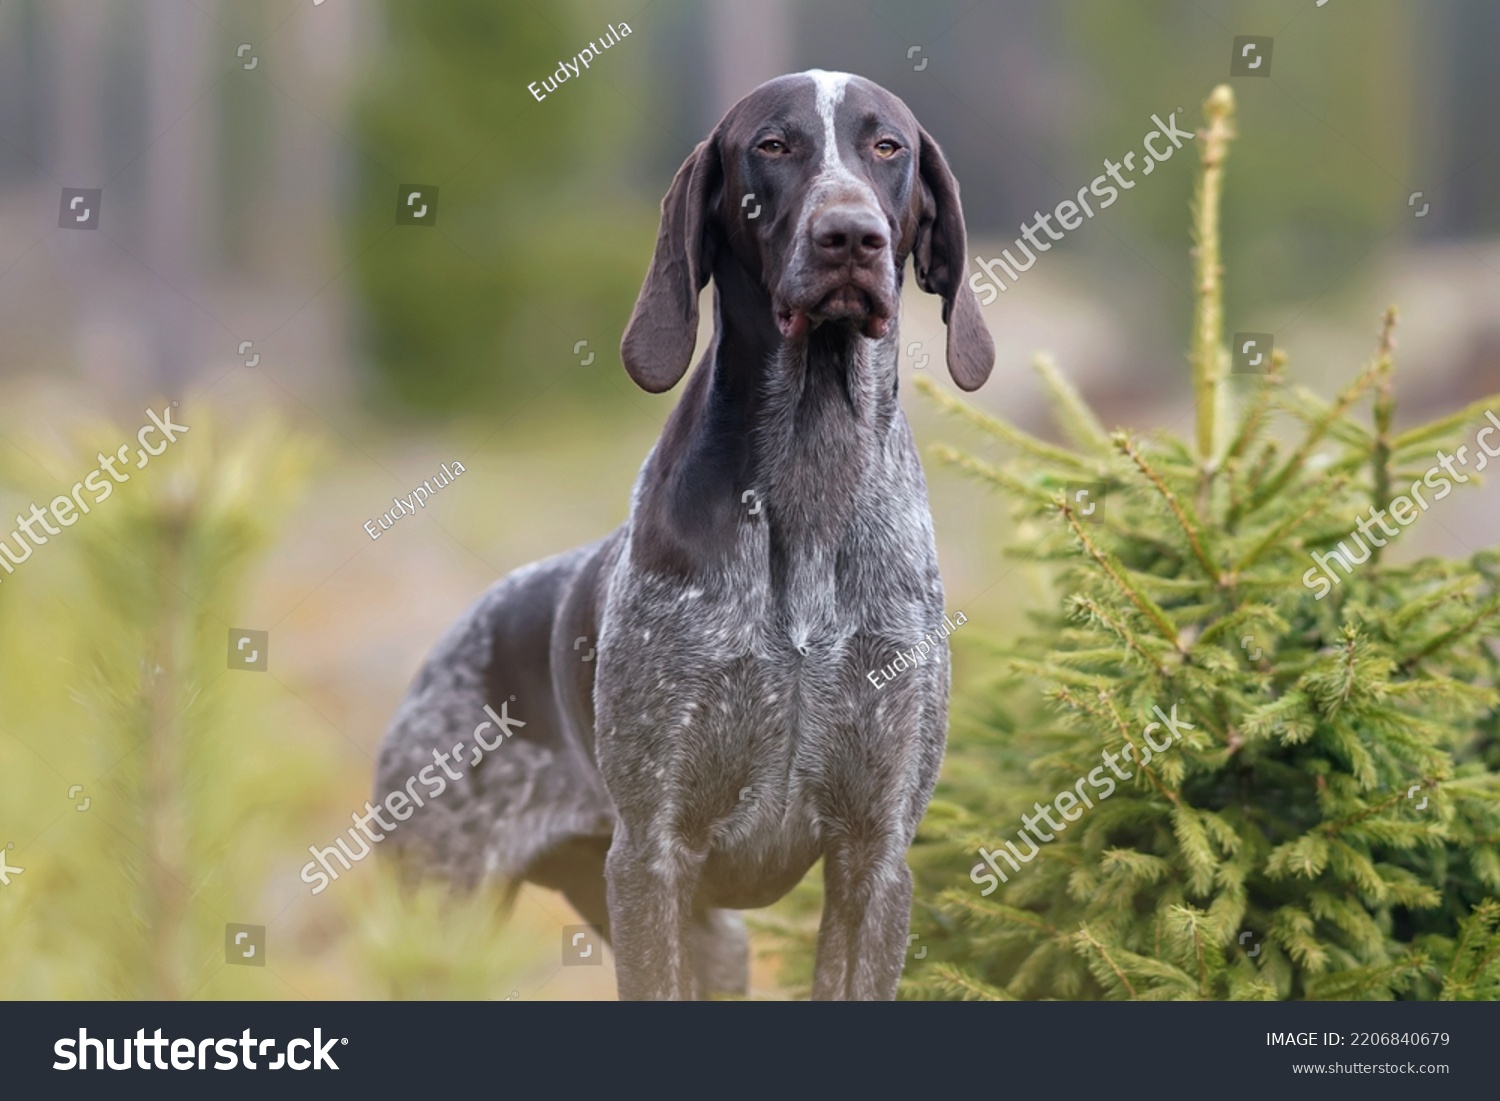 The portrait of a very serious brown marble German Shorthaired Pointer dog posing outdoors near coniferous trees in a forest in spring #2206840679